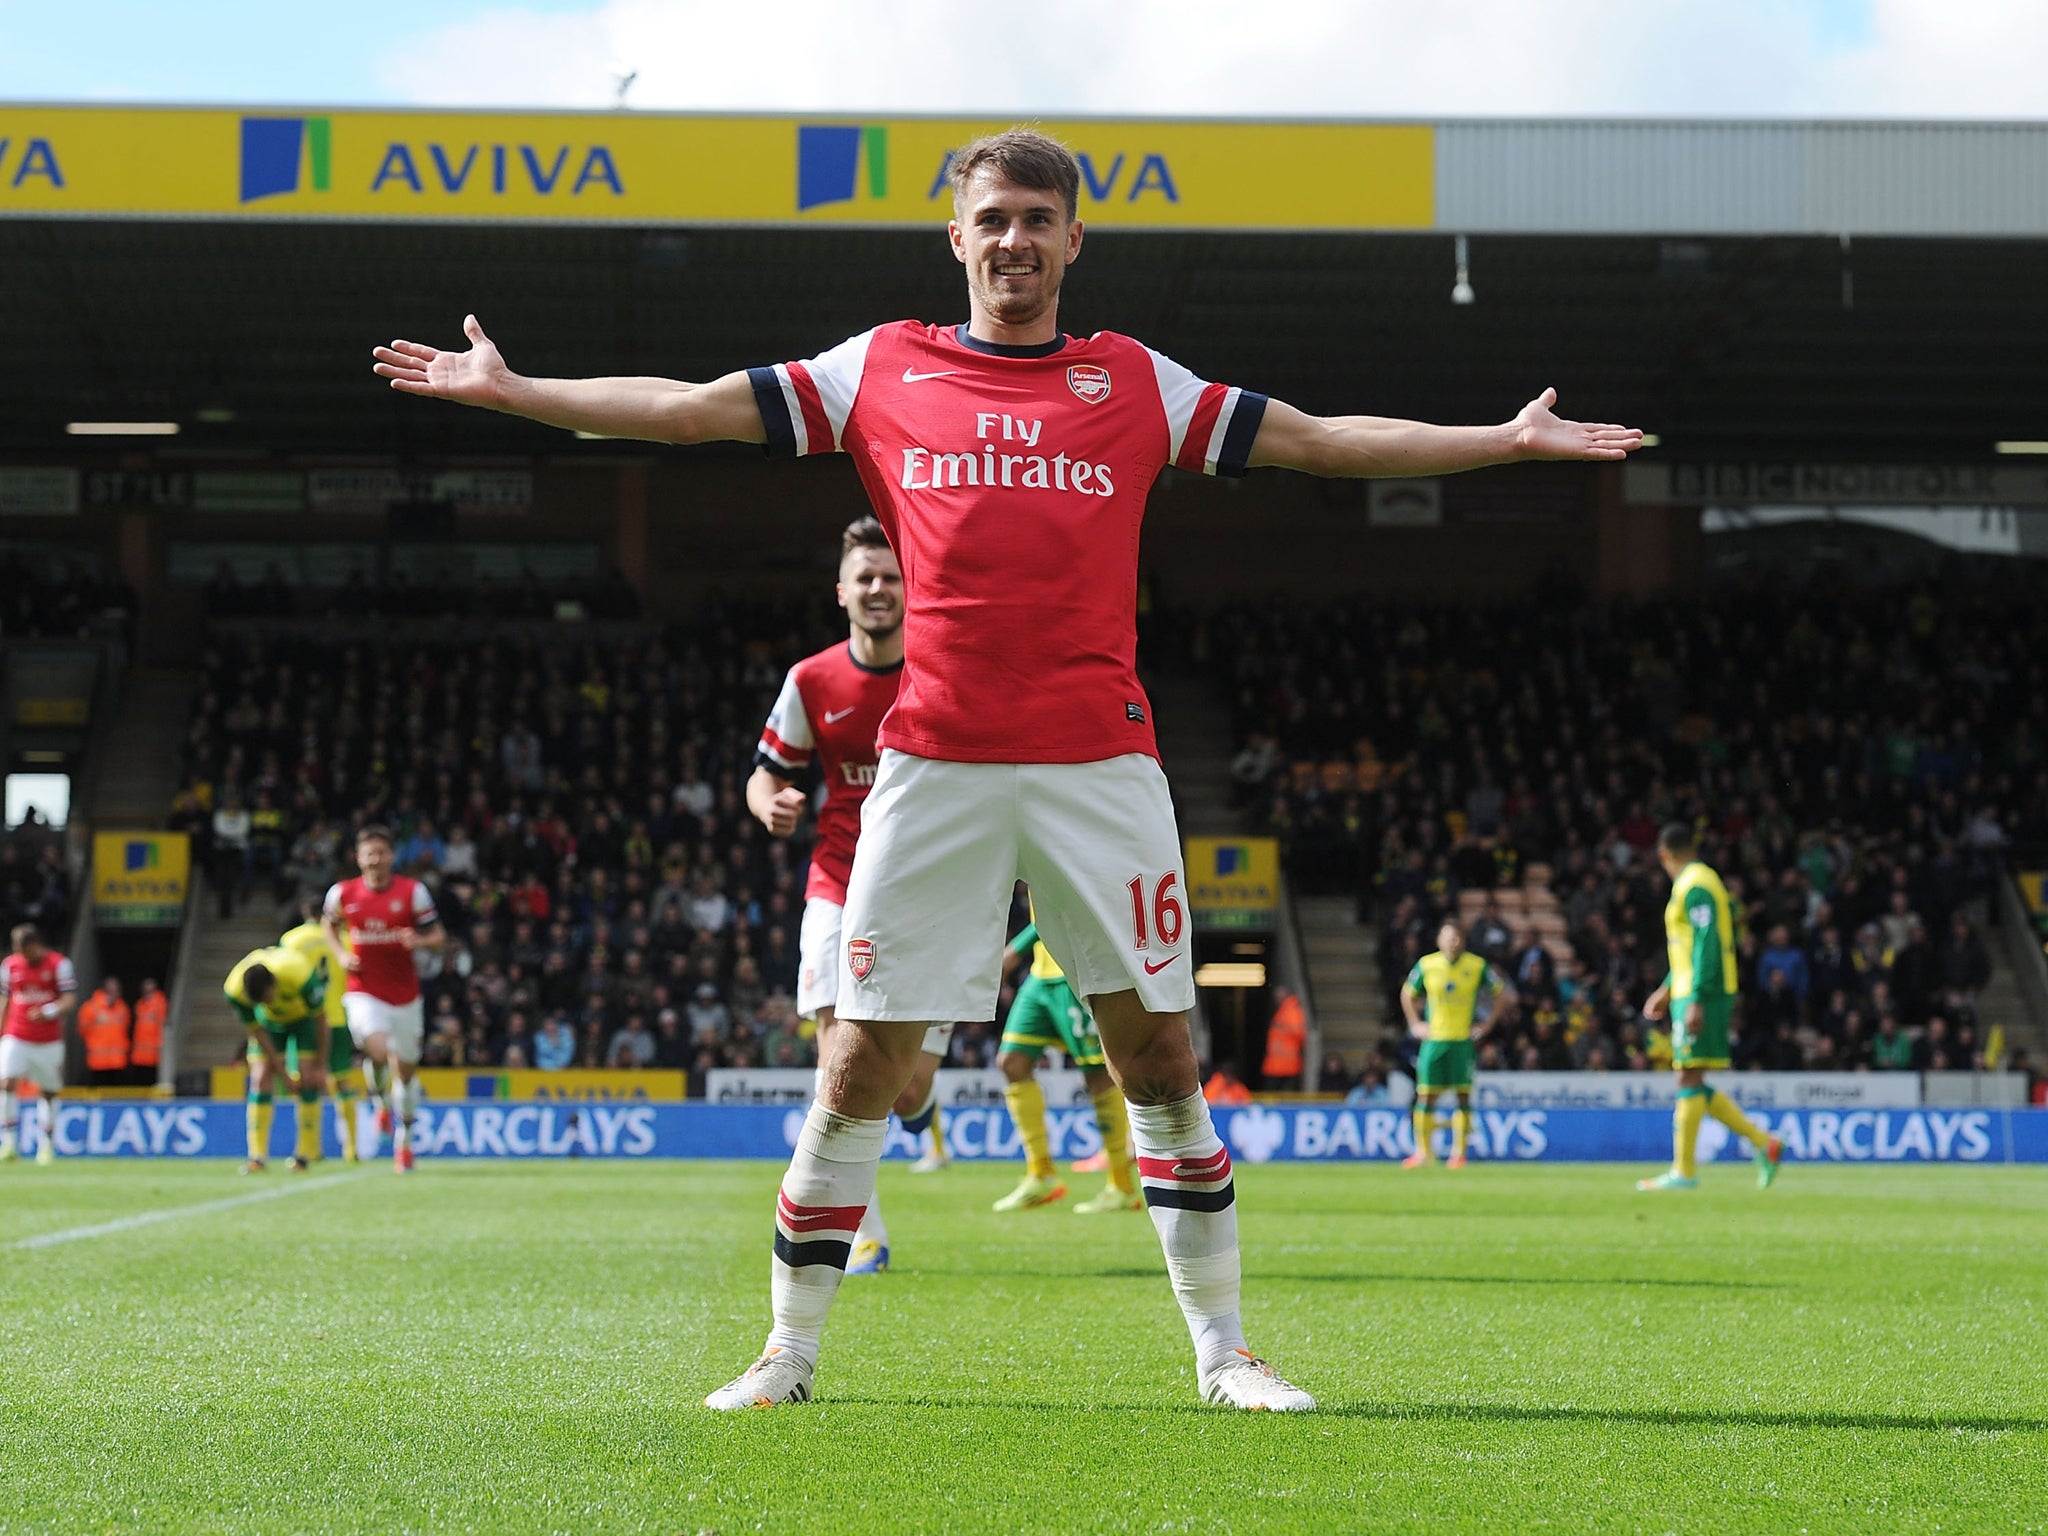 Aaron Ramsey celebrates scoring for Arsenal against Norwich